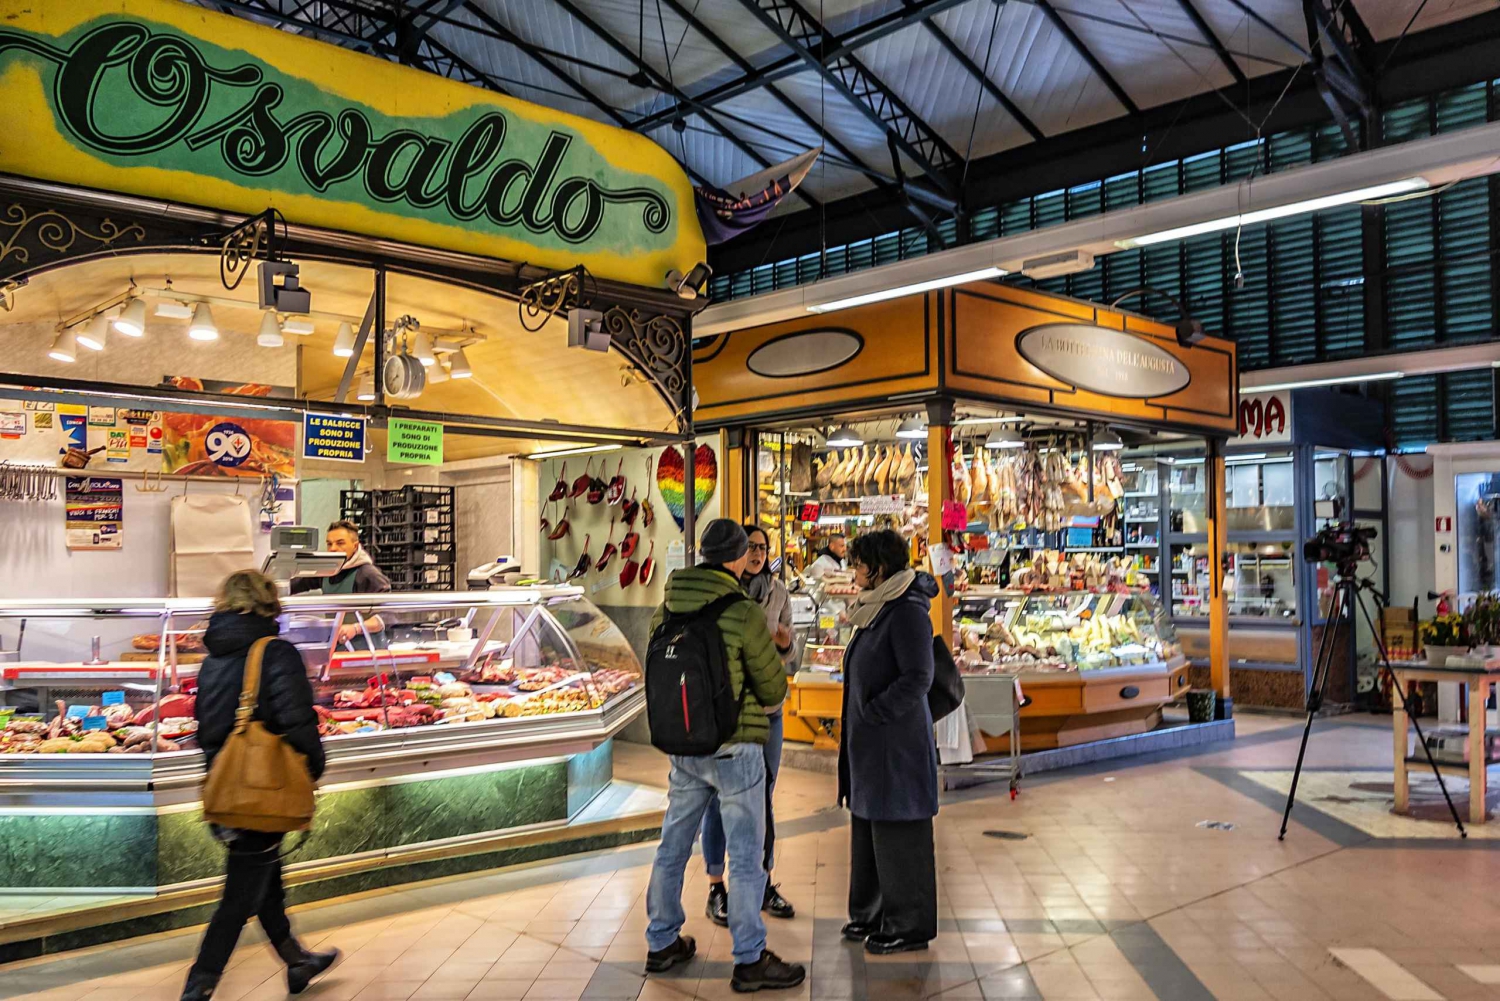 Florence: Grocery Market Food Tour and Tastings with a chef